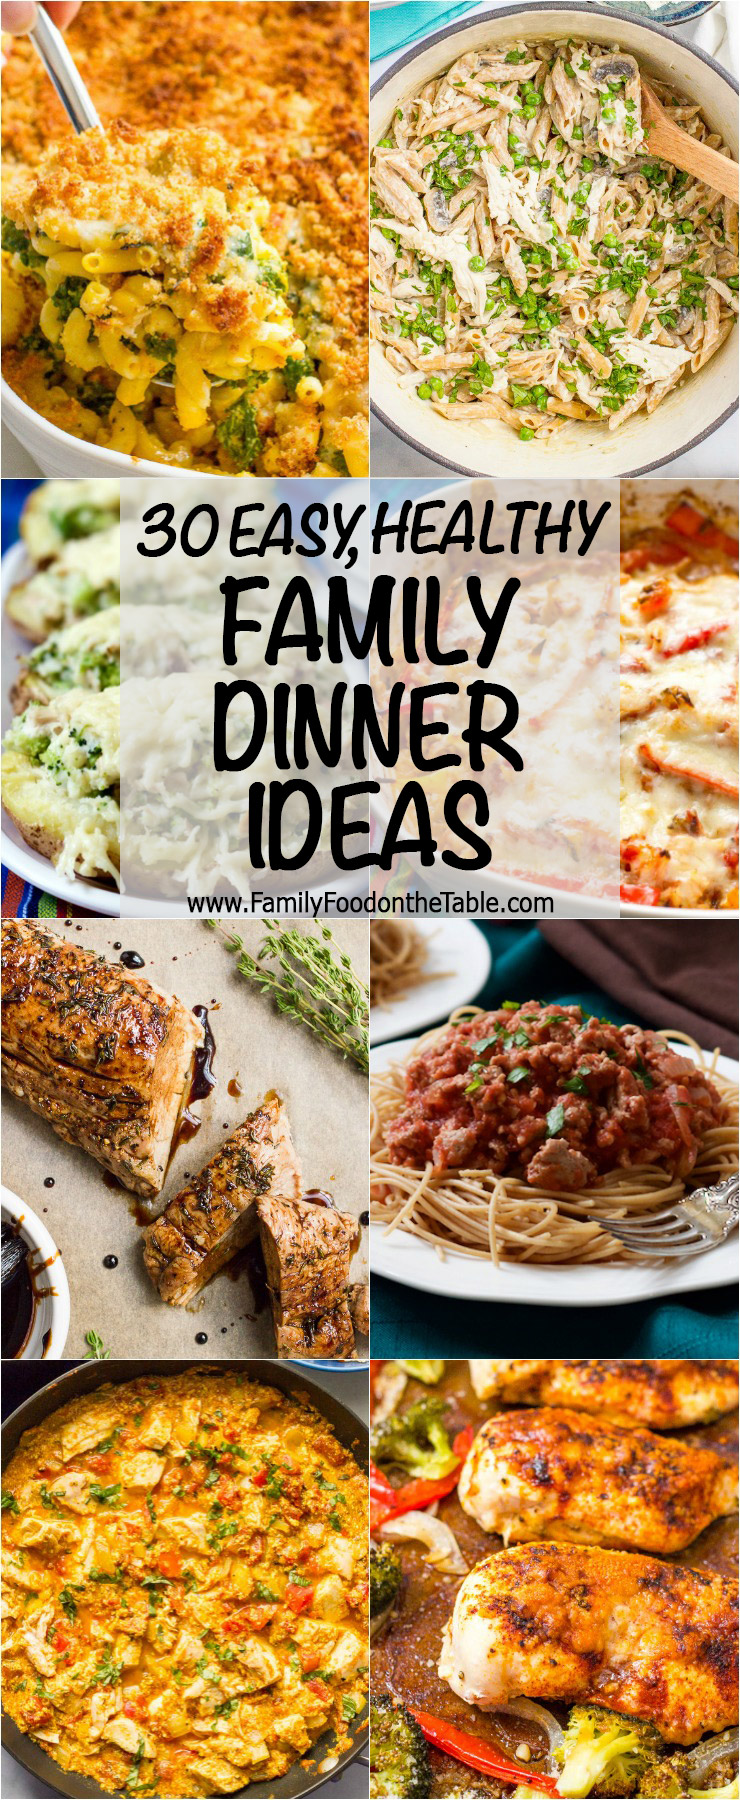 A full month of easy healthy family dinner ideas to spark some new dinner inspiration, plus a printable calendar and tons of recipes to try! | www.familyfoodonthetable.com